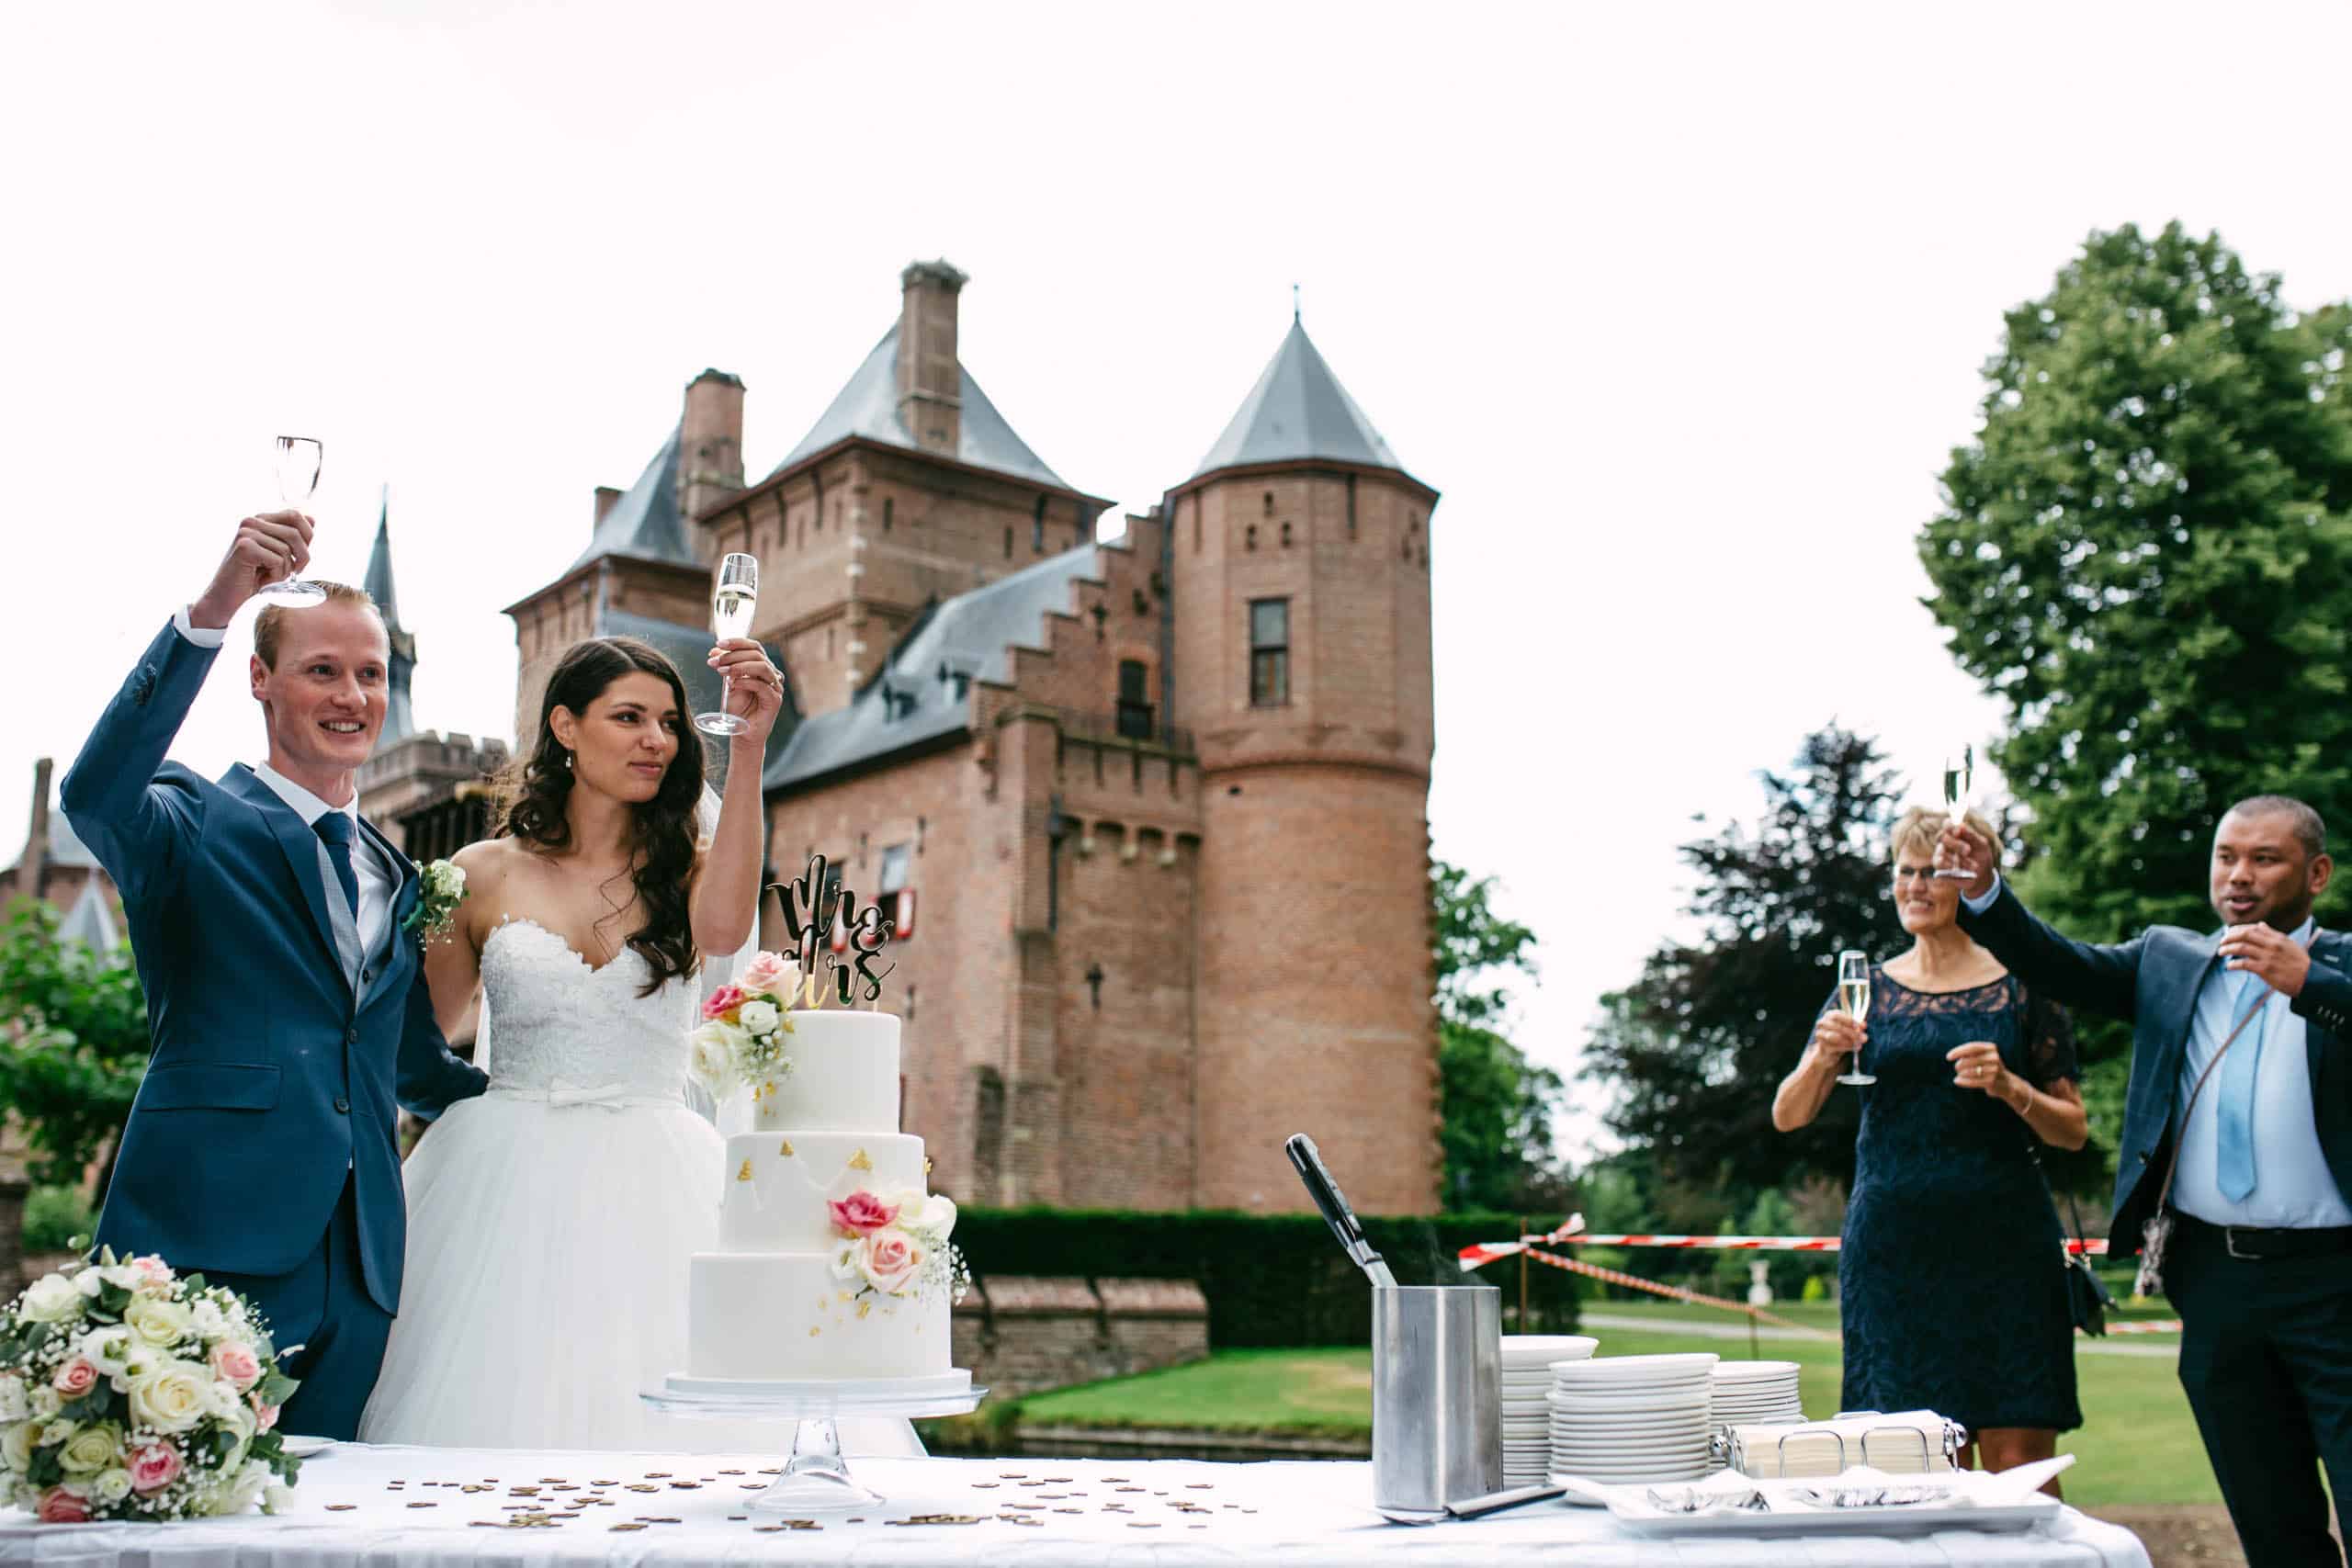 A bride and groom cut their wedding cake in front of a castle, one of the most enchanting wedding venues in South Holland.